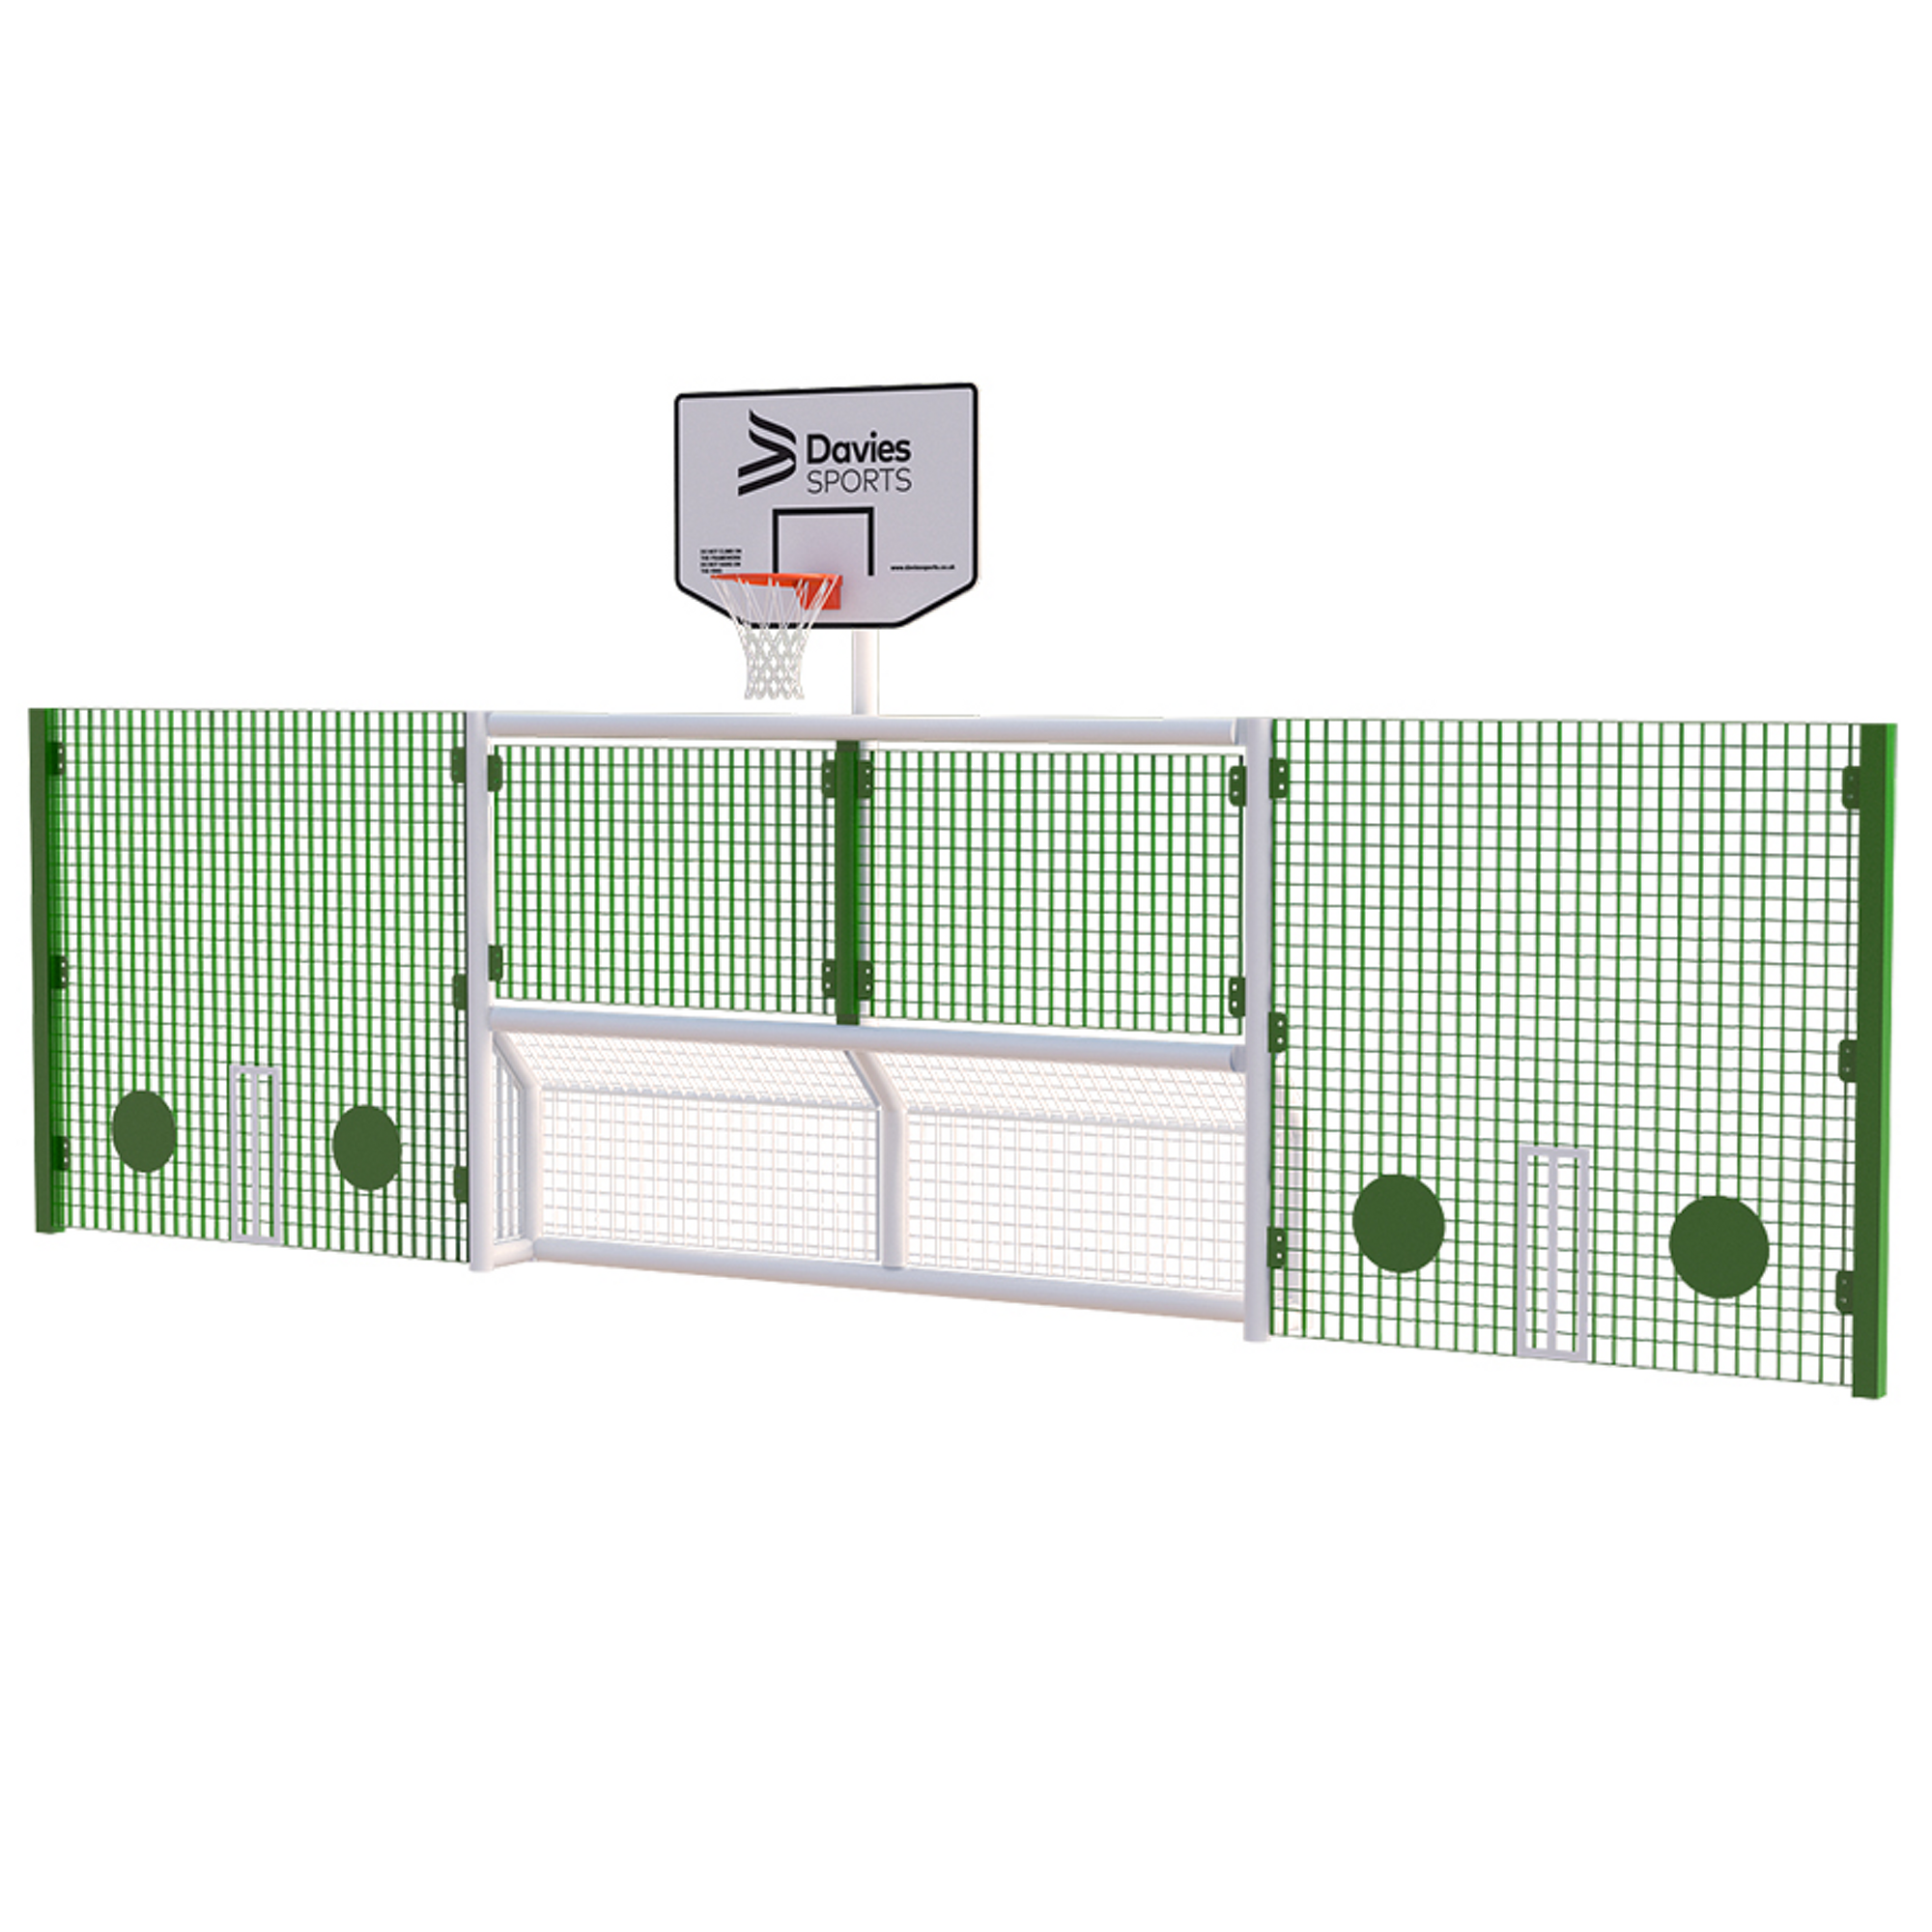 Primary High Sides Bball Wht Frame Green